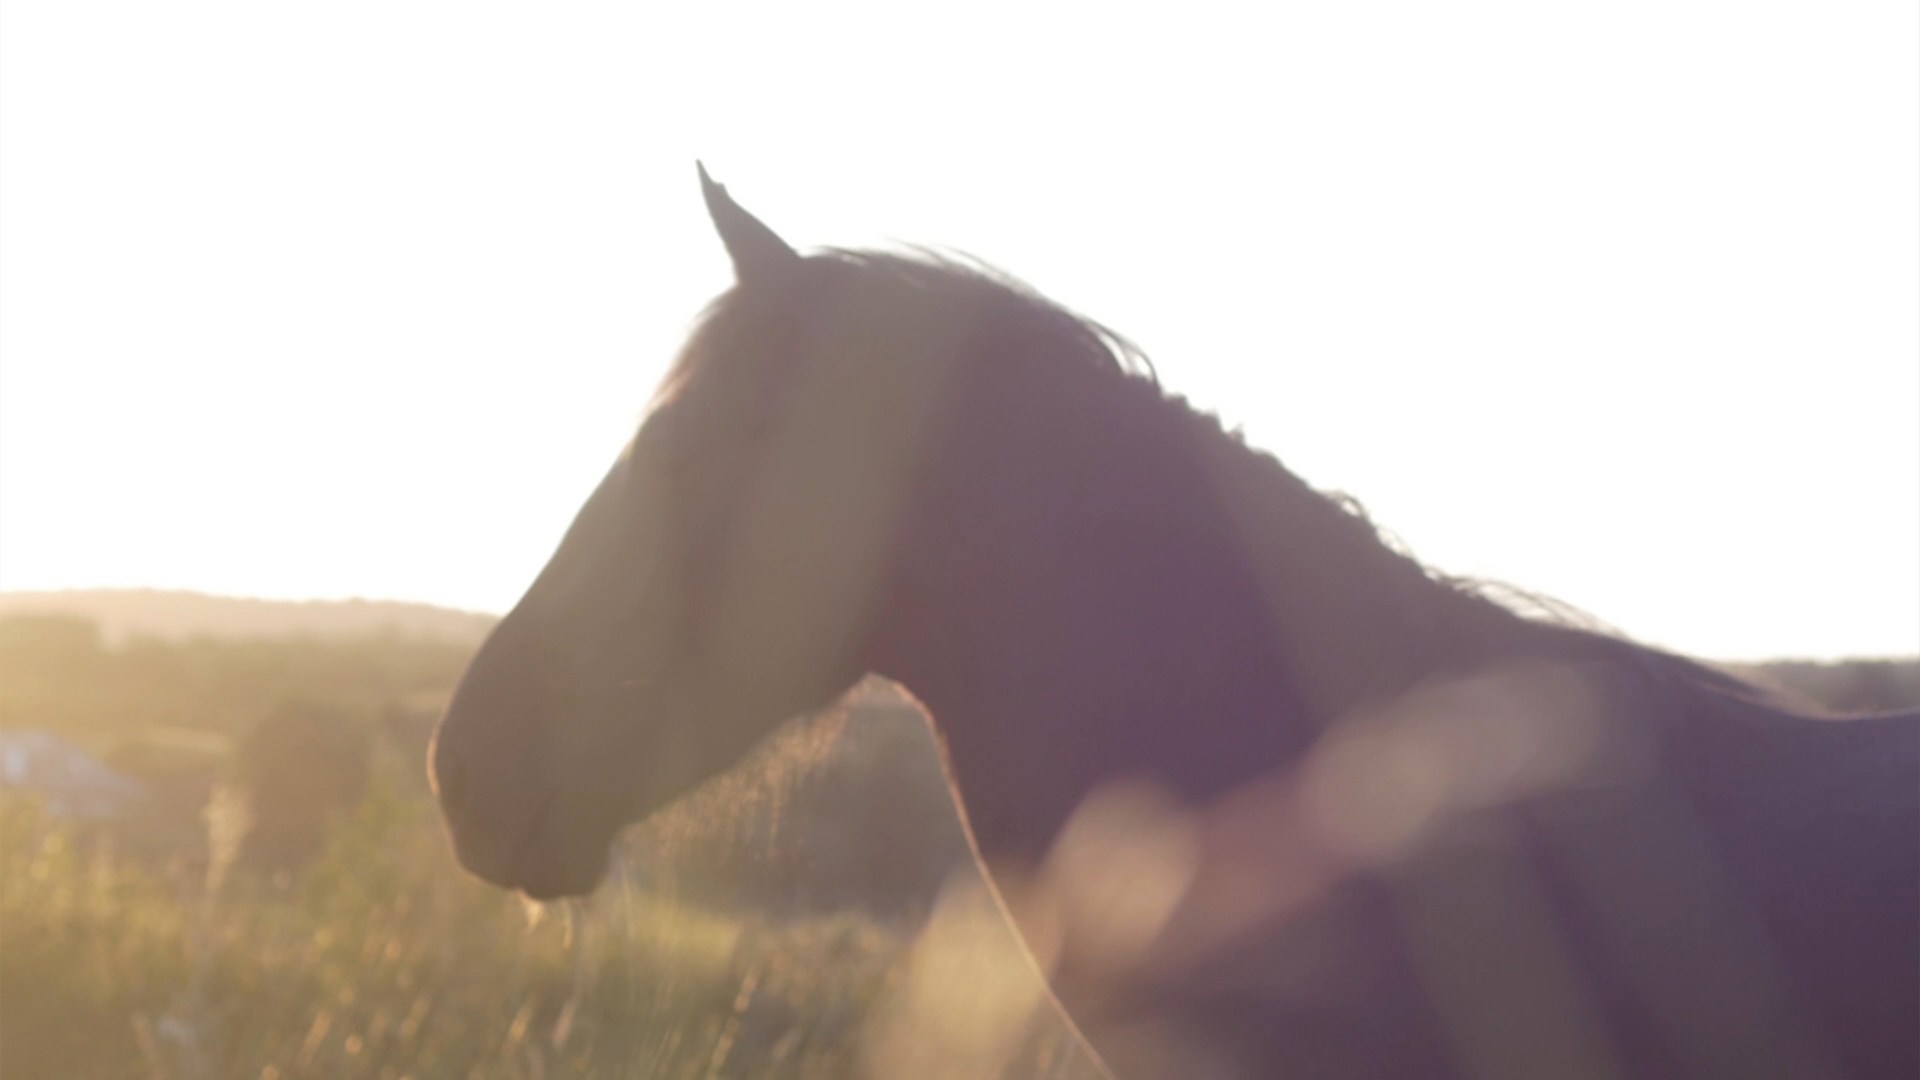 An Lucht Siúil (The Walking People), 2020 Mark Garry A still image taken from a film called Lucht Siúil (The Walking People) made by Mark Garry. The image is of a horse seen from the side stood in a field. Only the head and shoulders are visible and the field behind is blurred by the summer light.